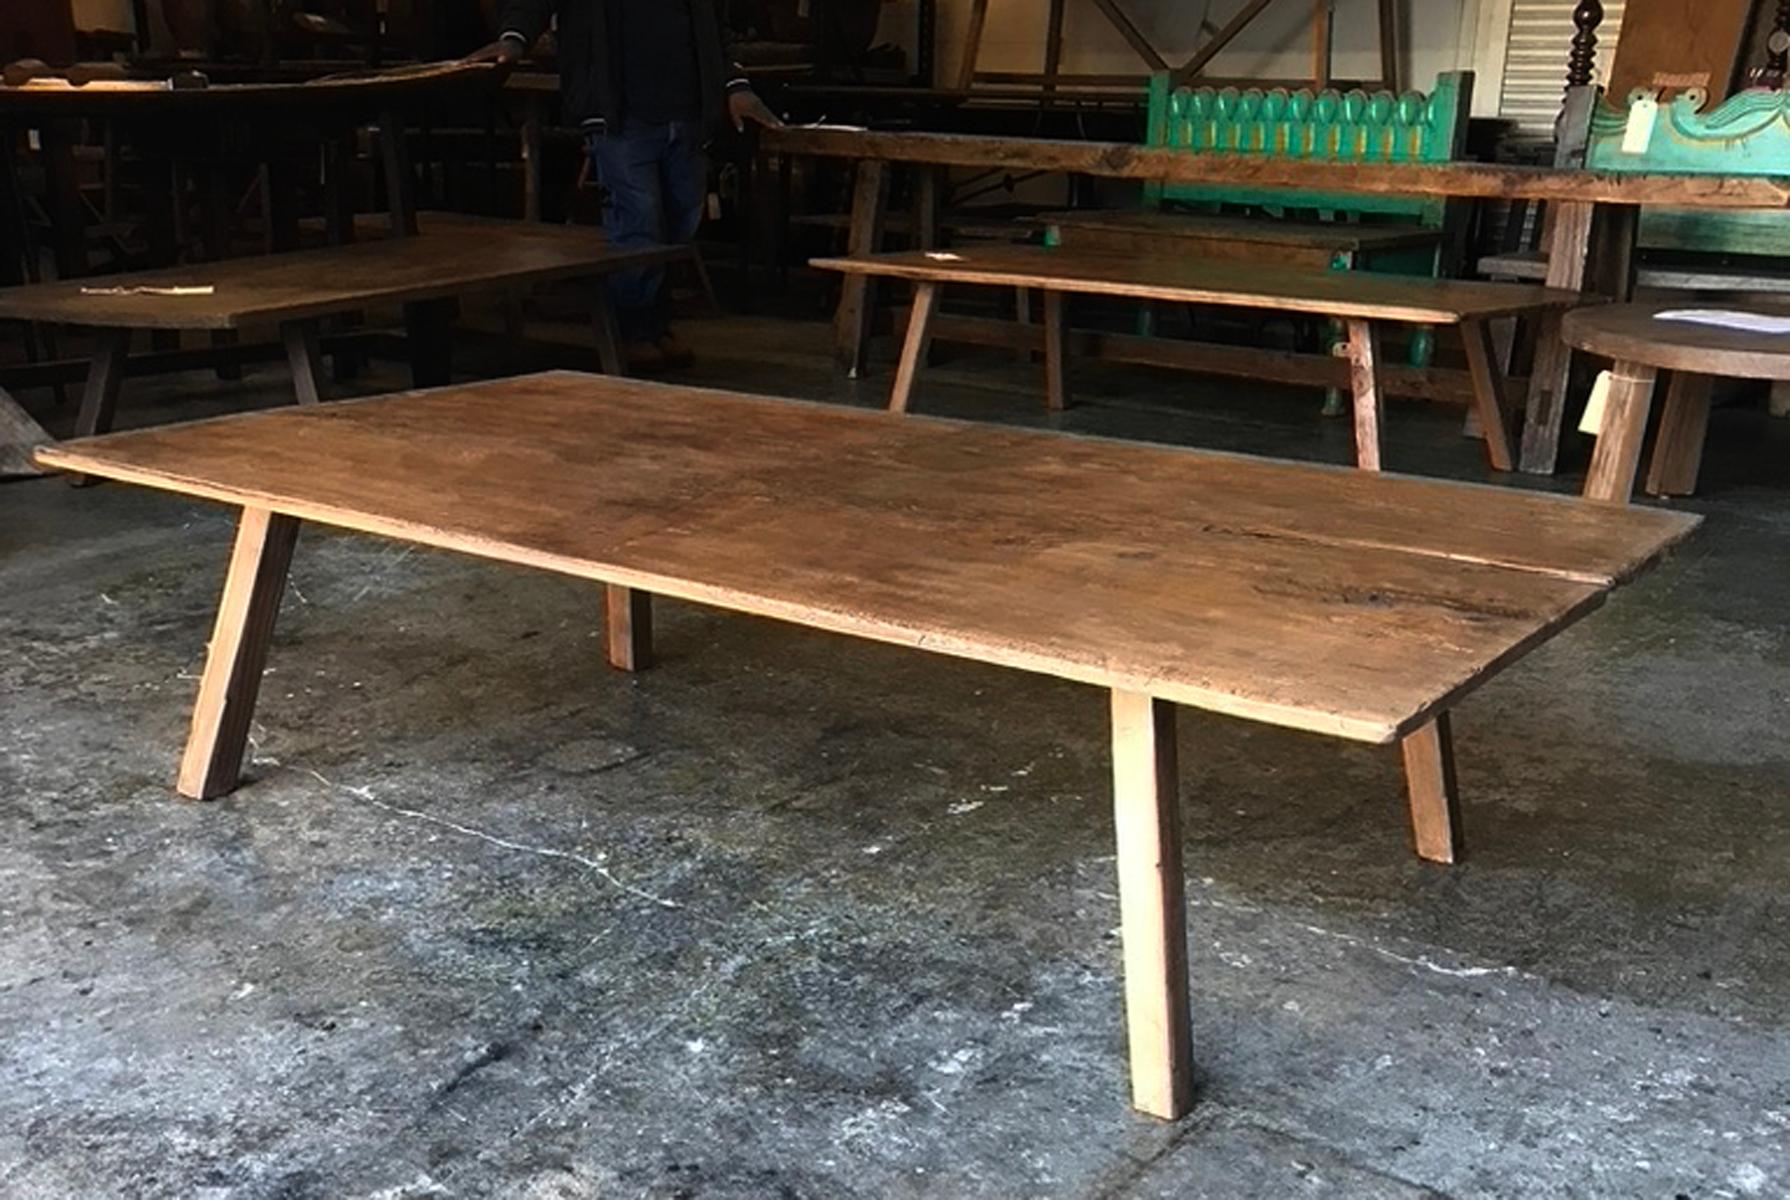 This coffee table consists of a beautiful, old, hand-hewn top on new legs, finished to match the top. The wood has beautiful, age appropriate wear in a range of colors, all naturally distressed. This one wide piece of wood was at some part used on